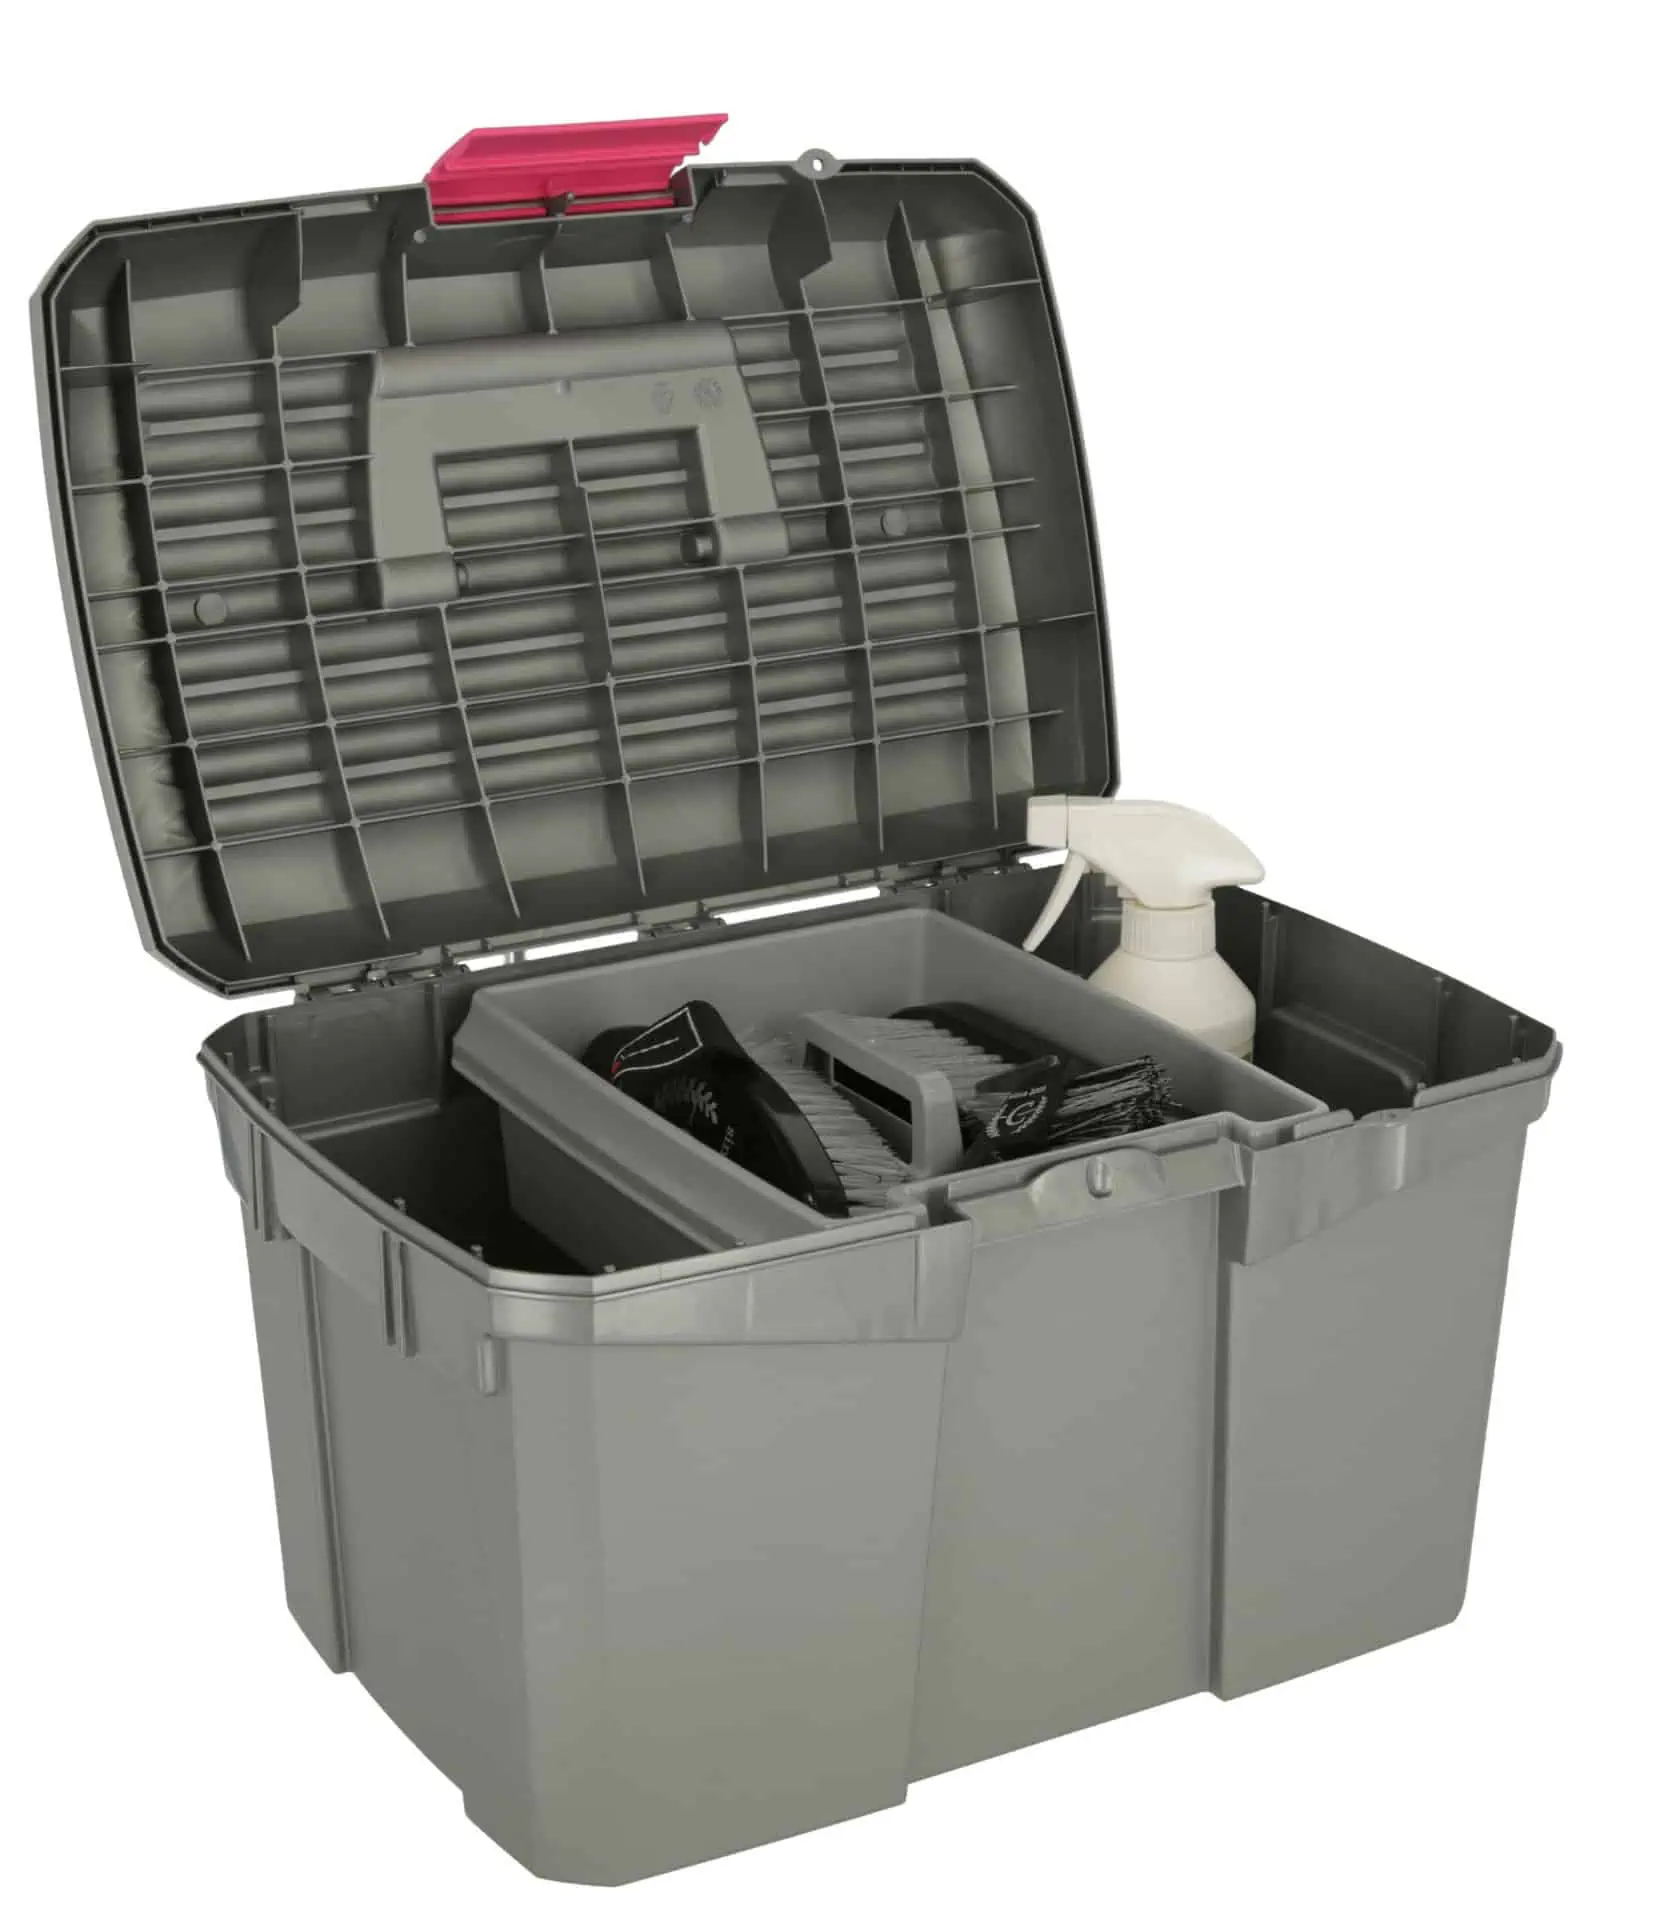 Grooming Box Siena grey/pink with Removable Insert